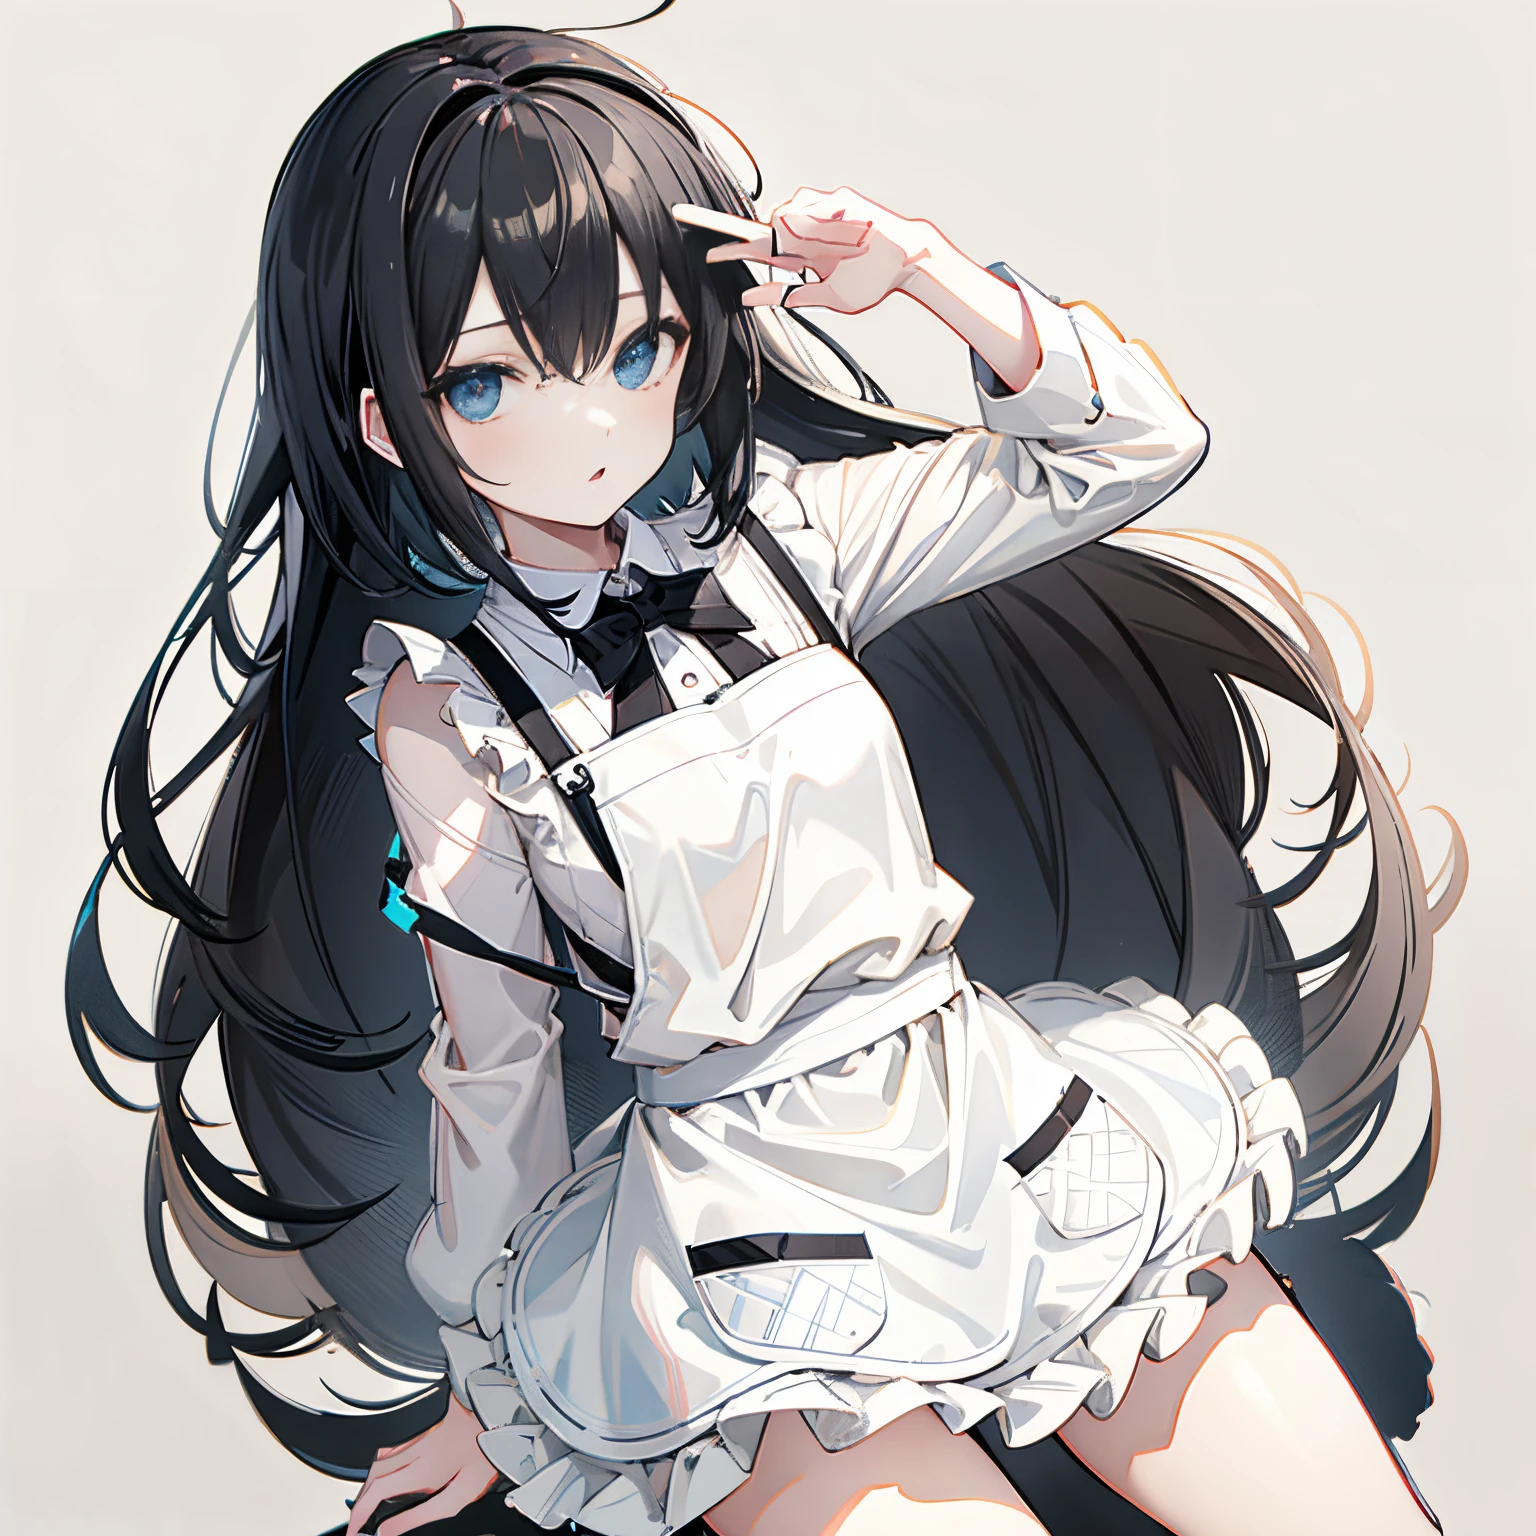 【Highest Quality, masutepiece】 [1 girl in,expressioness, turquoise Eyes, front facing, Jet-black hair,straight haired, Bery short hair , black Cafe Apron] (Gray white background:1.5),